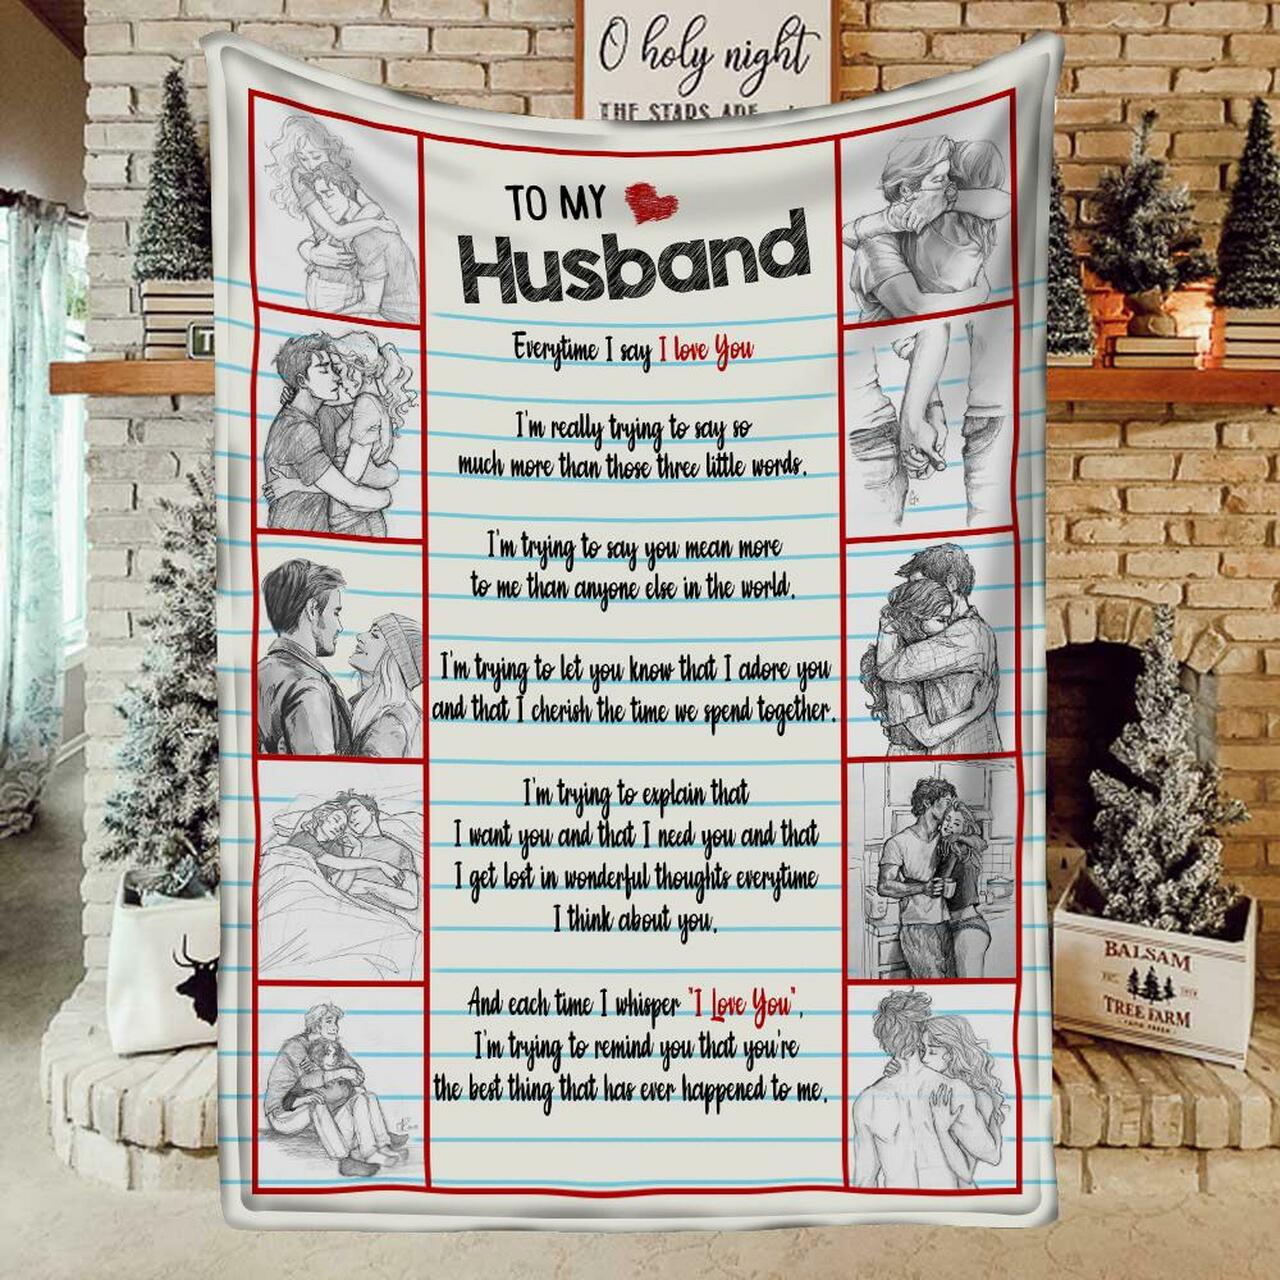 To My Husband Everytime I Say I Love You Blanket Gift For My Husband Couple Vanlentine's Day Decor Bedding Couch Sofa Soft And Comfy Cozy